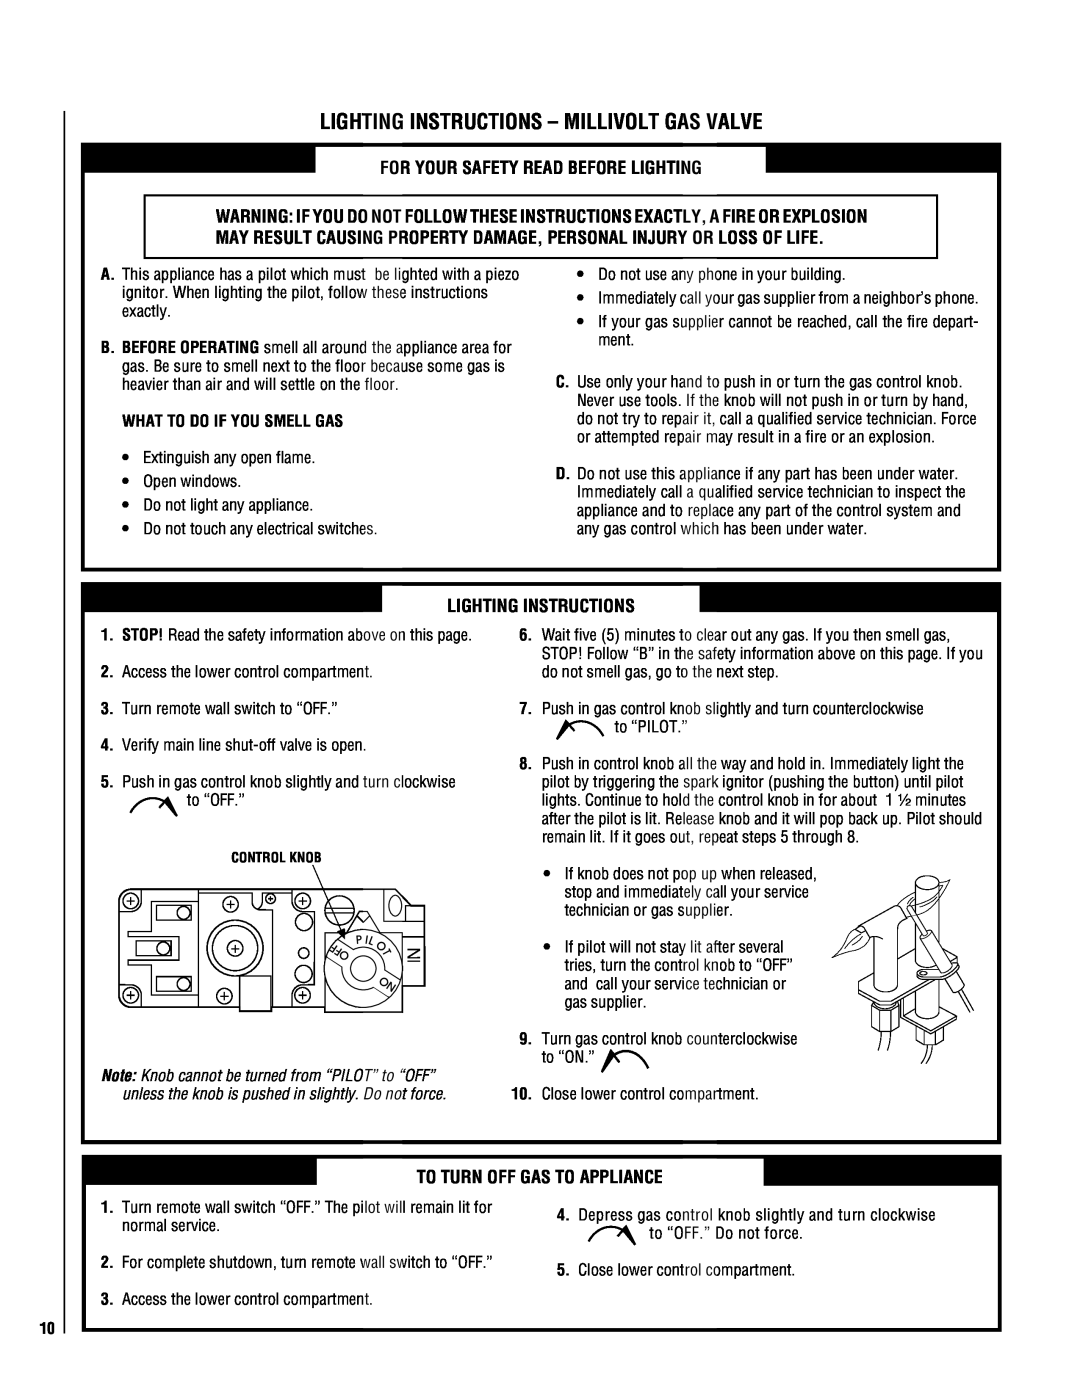 TOA Electronics P0055-DRG manual For Your Safety Read Before Lighting, Lighting Instructions, To Turn Off Gas To Appliance 